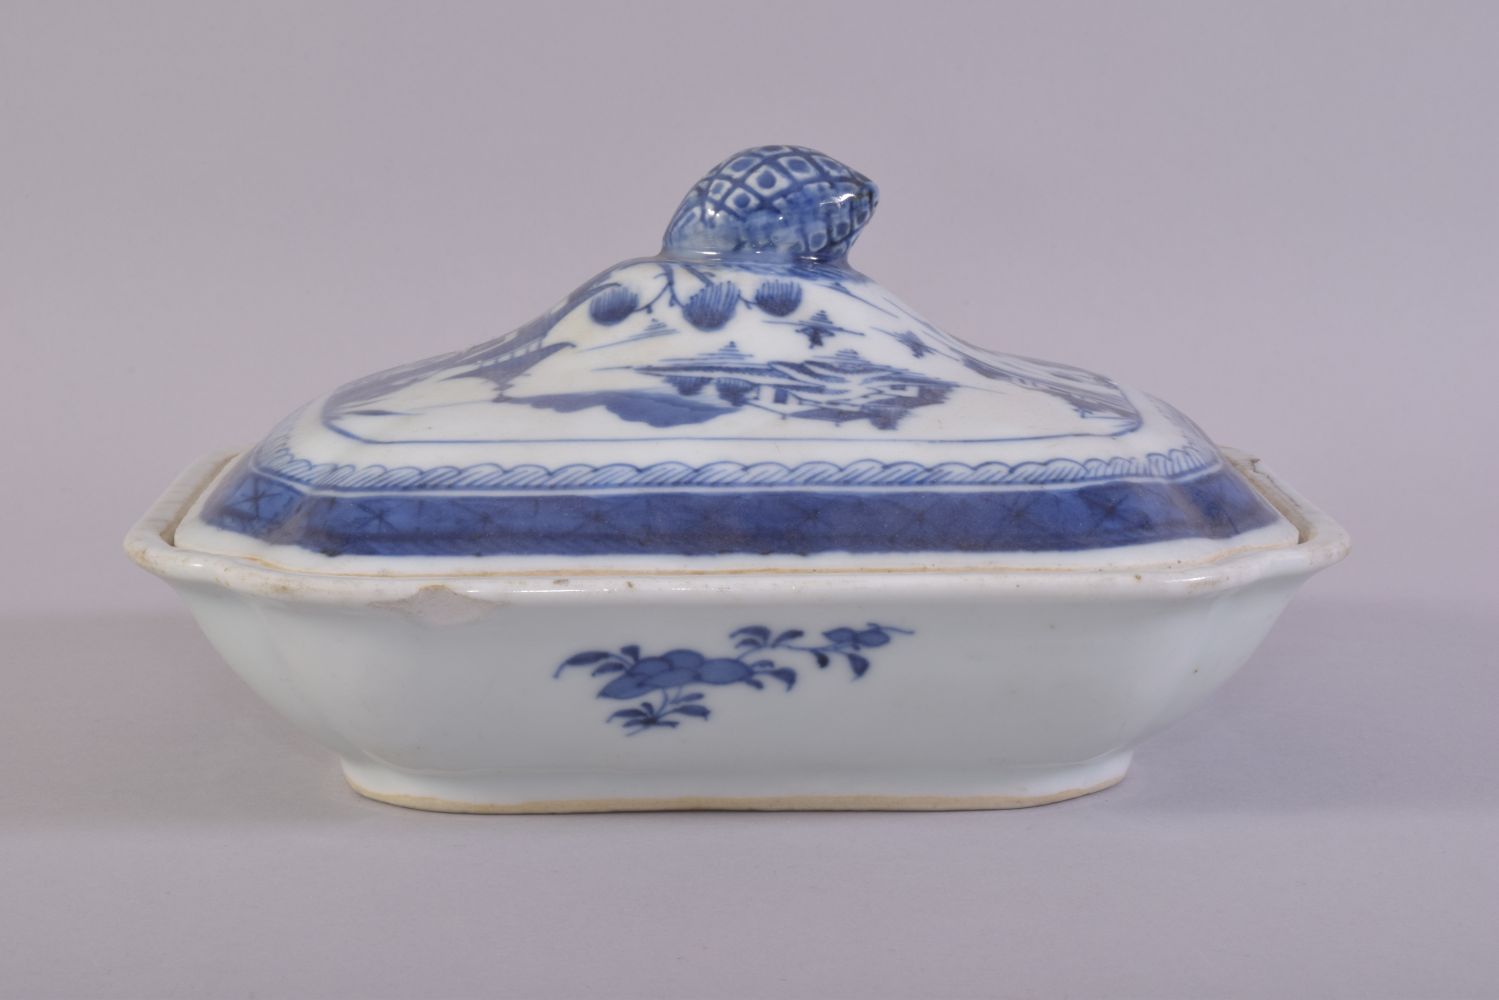 A CHINESE BLUE AND WHITE PORCELAIN TUREEN AND COVER, decorated with landscape scenes of buildings - Image 3 of 8